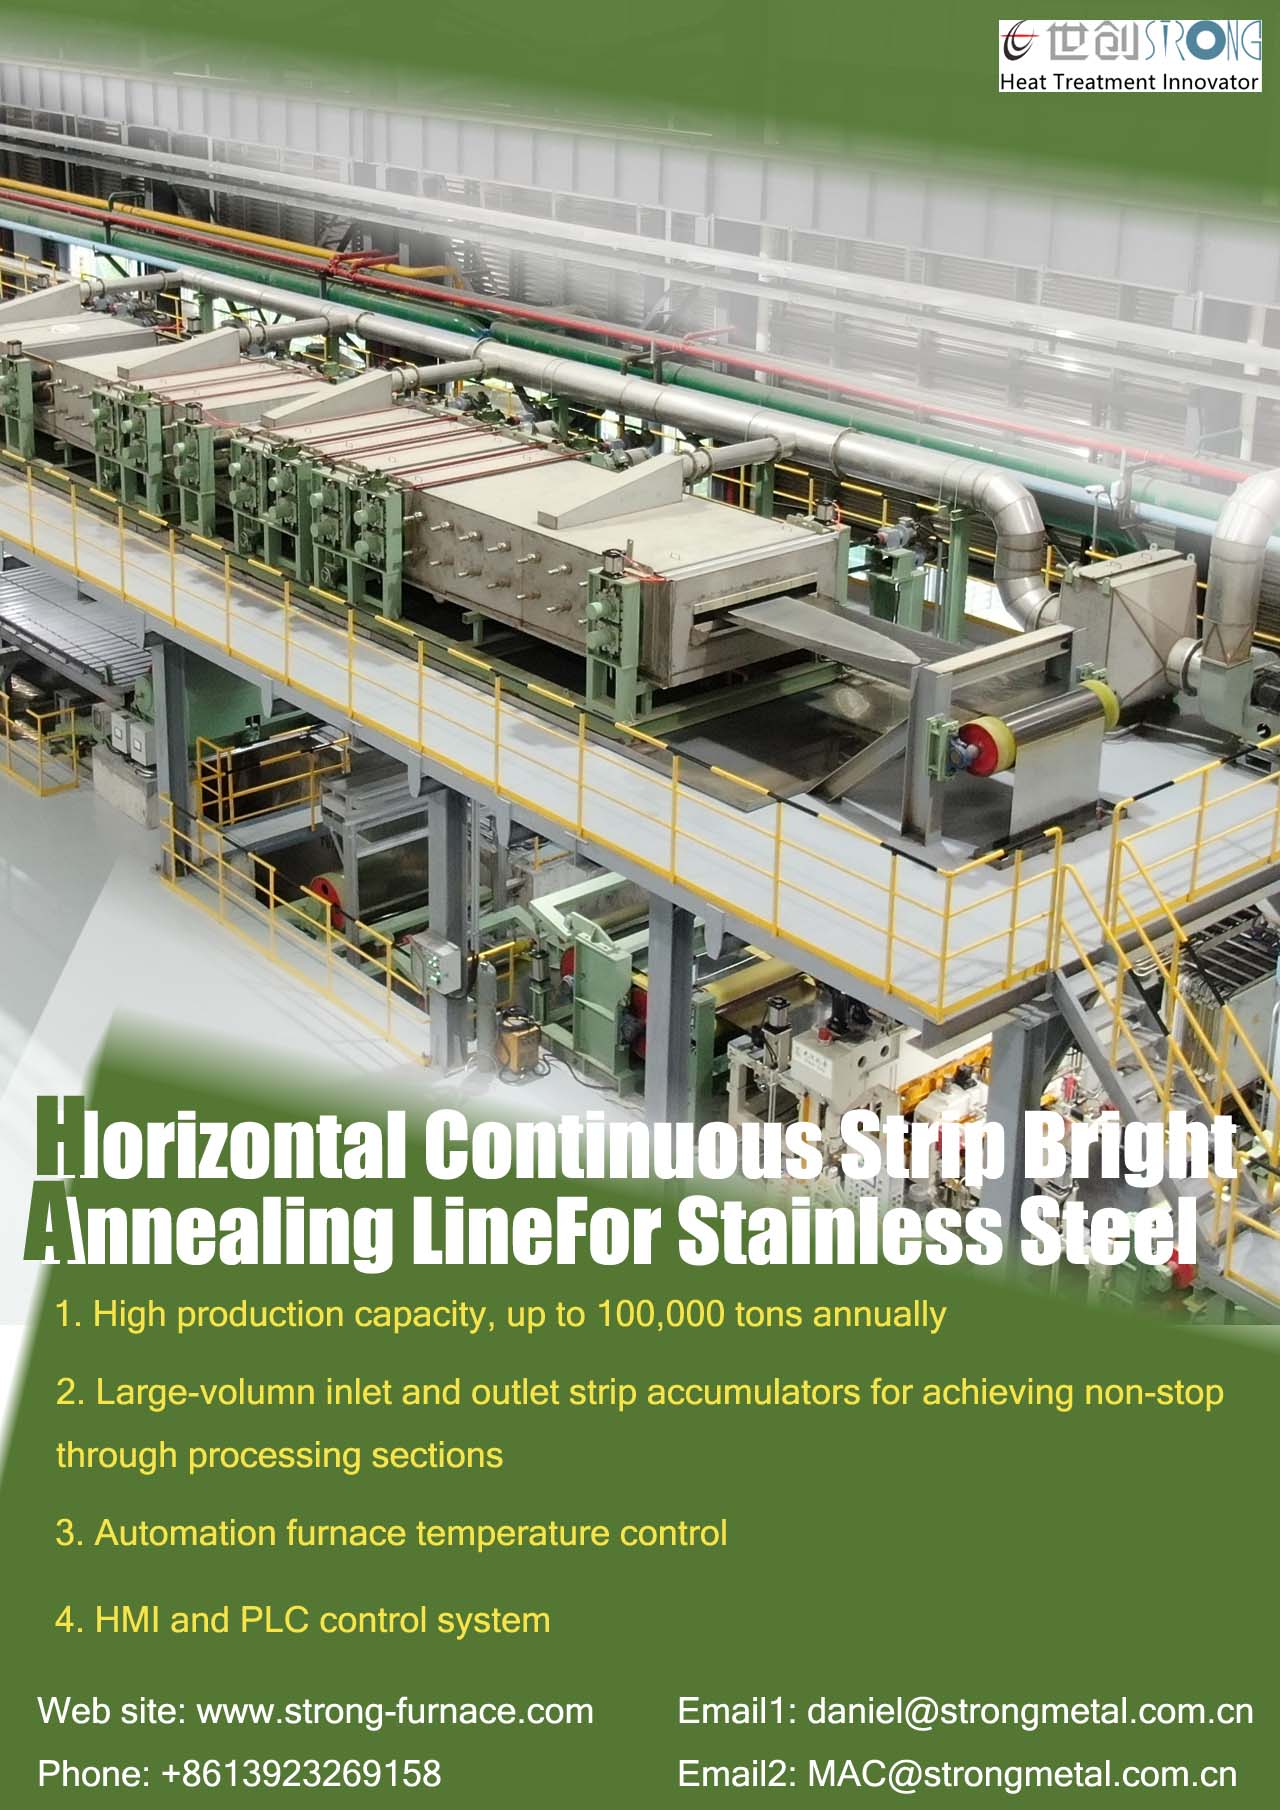 continuous cleaning line